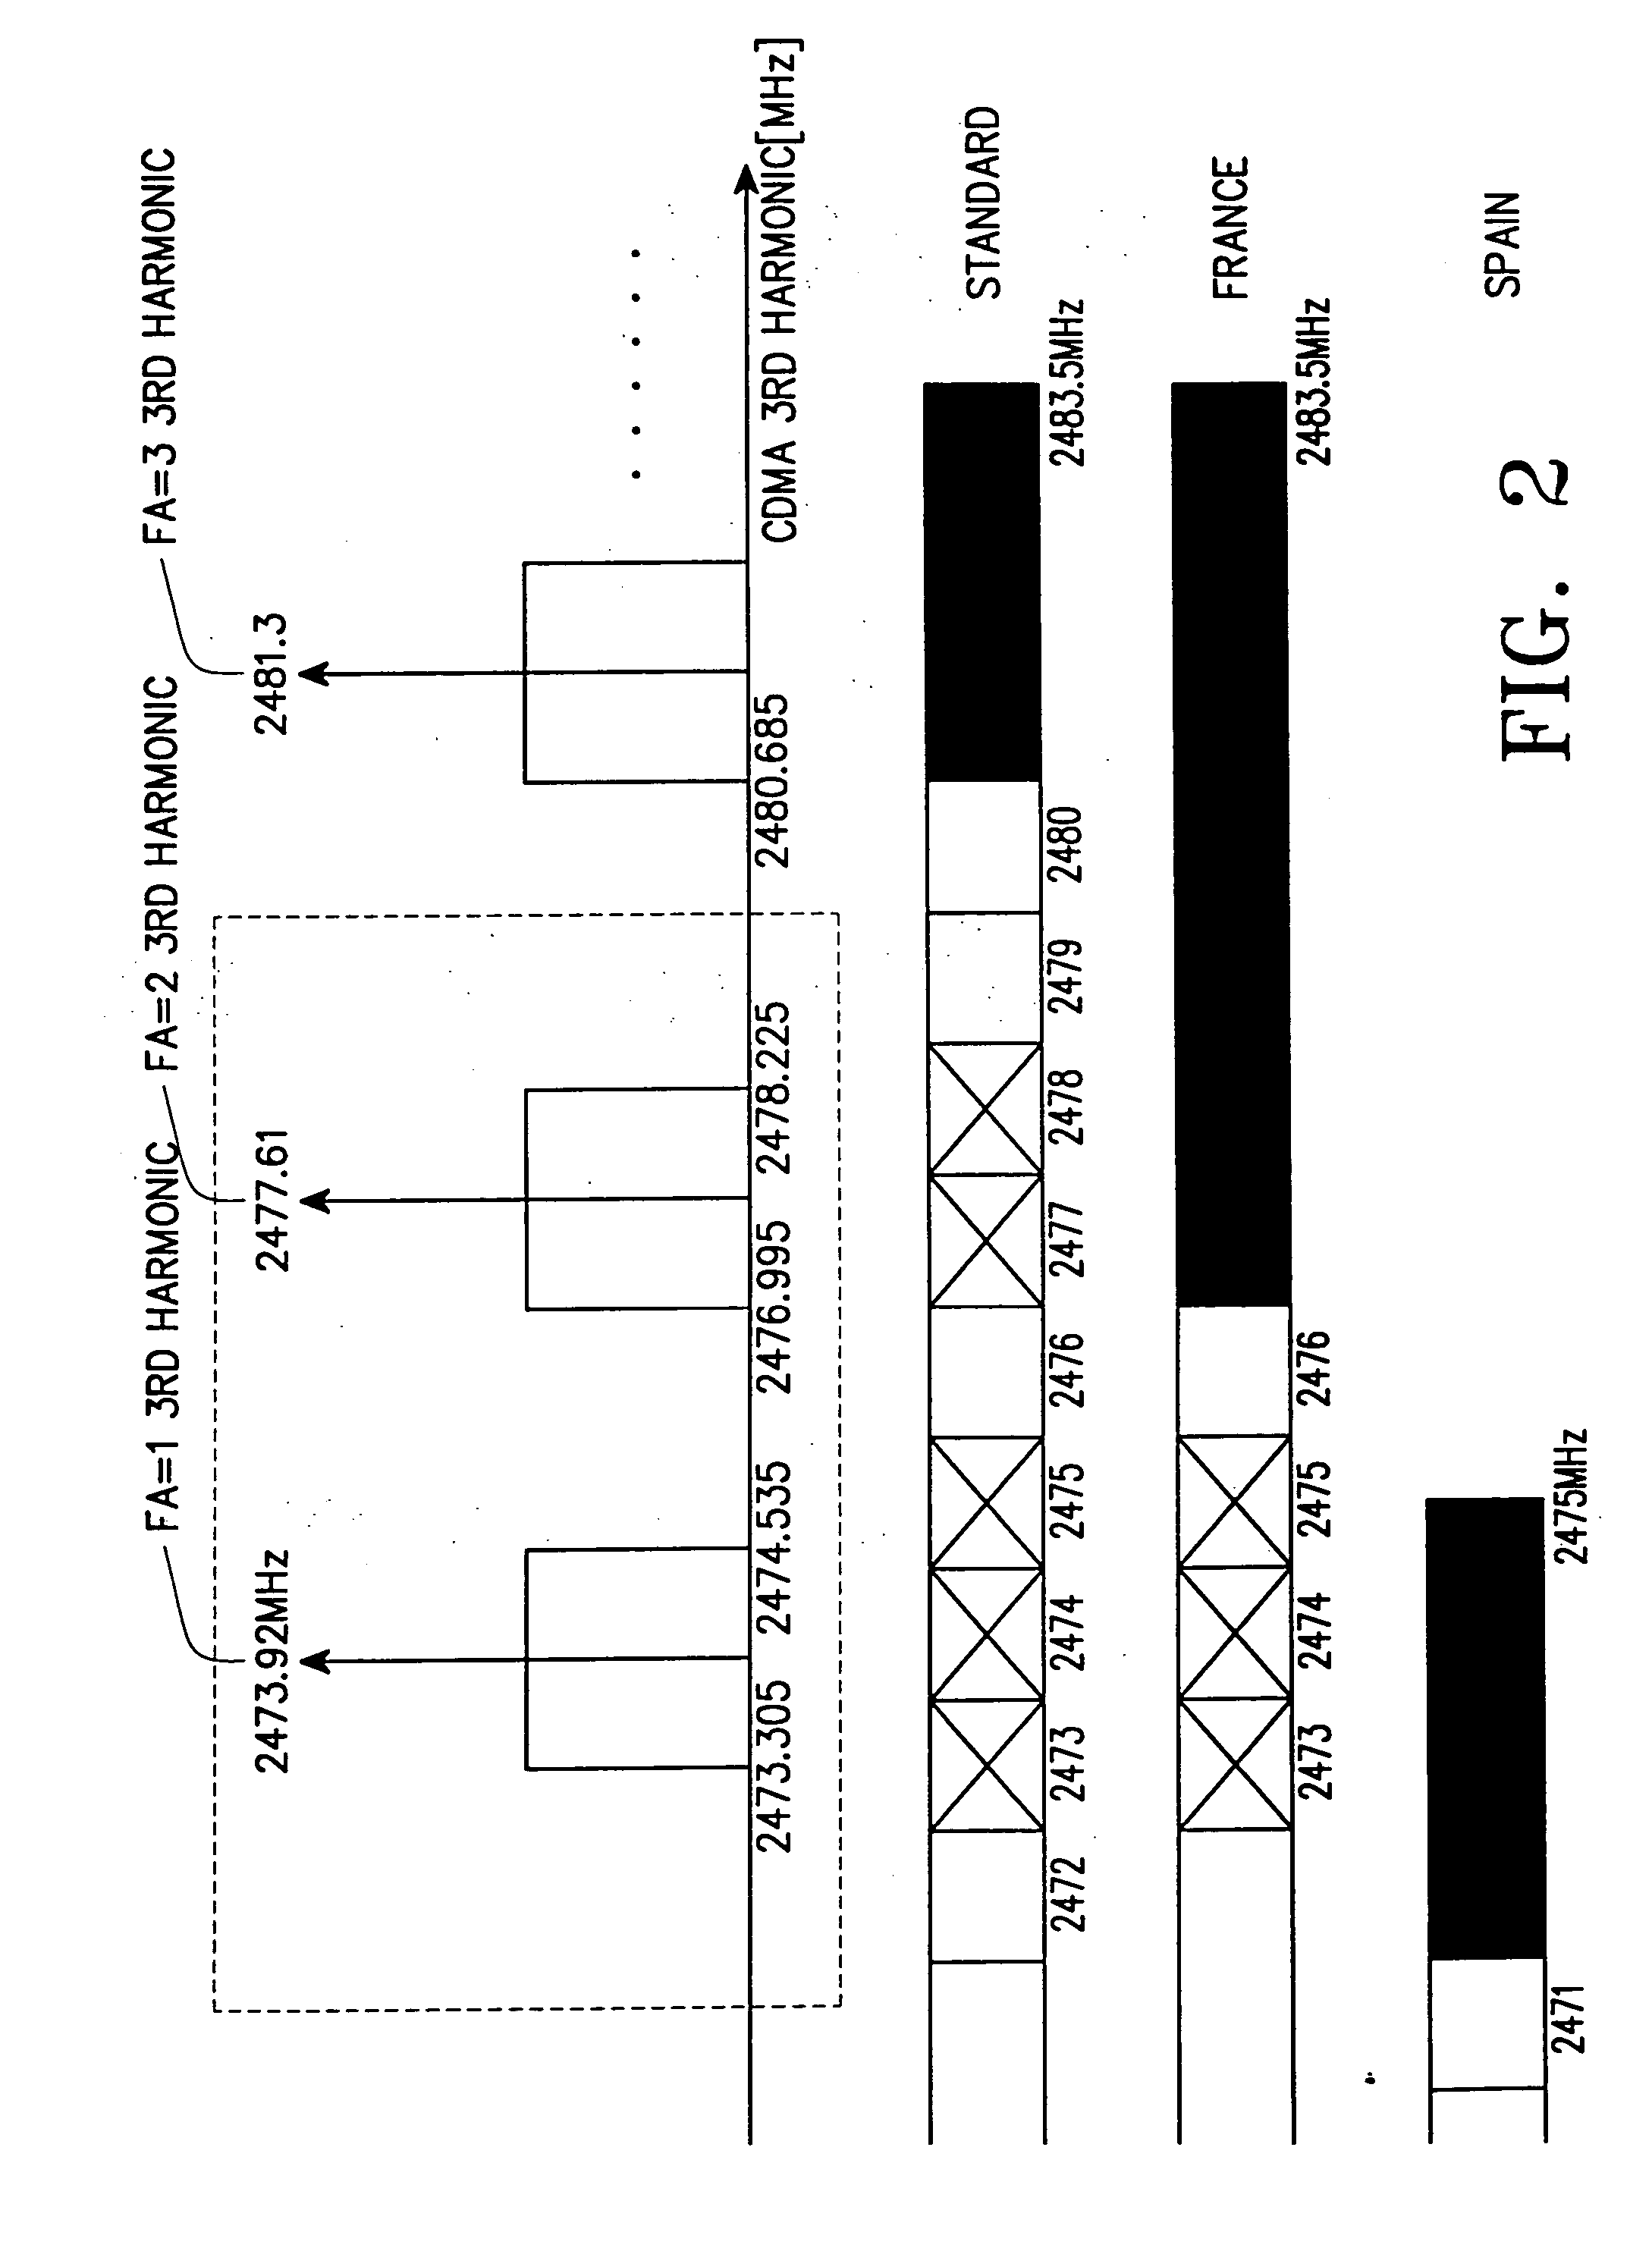 Apparatus and method for removing signal interference in a local radio communication device mounted in a mobile terminal